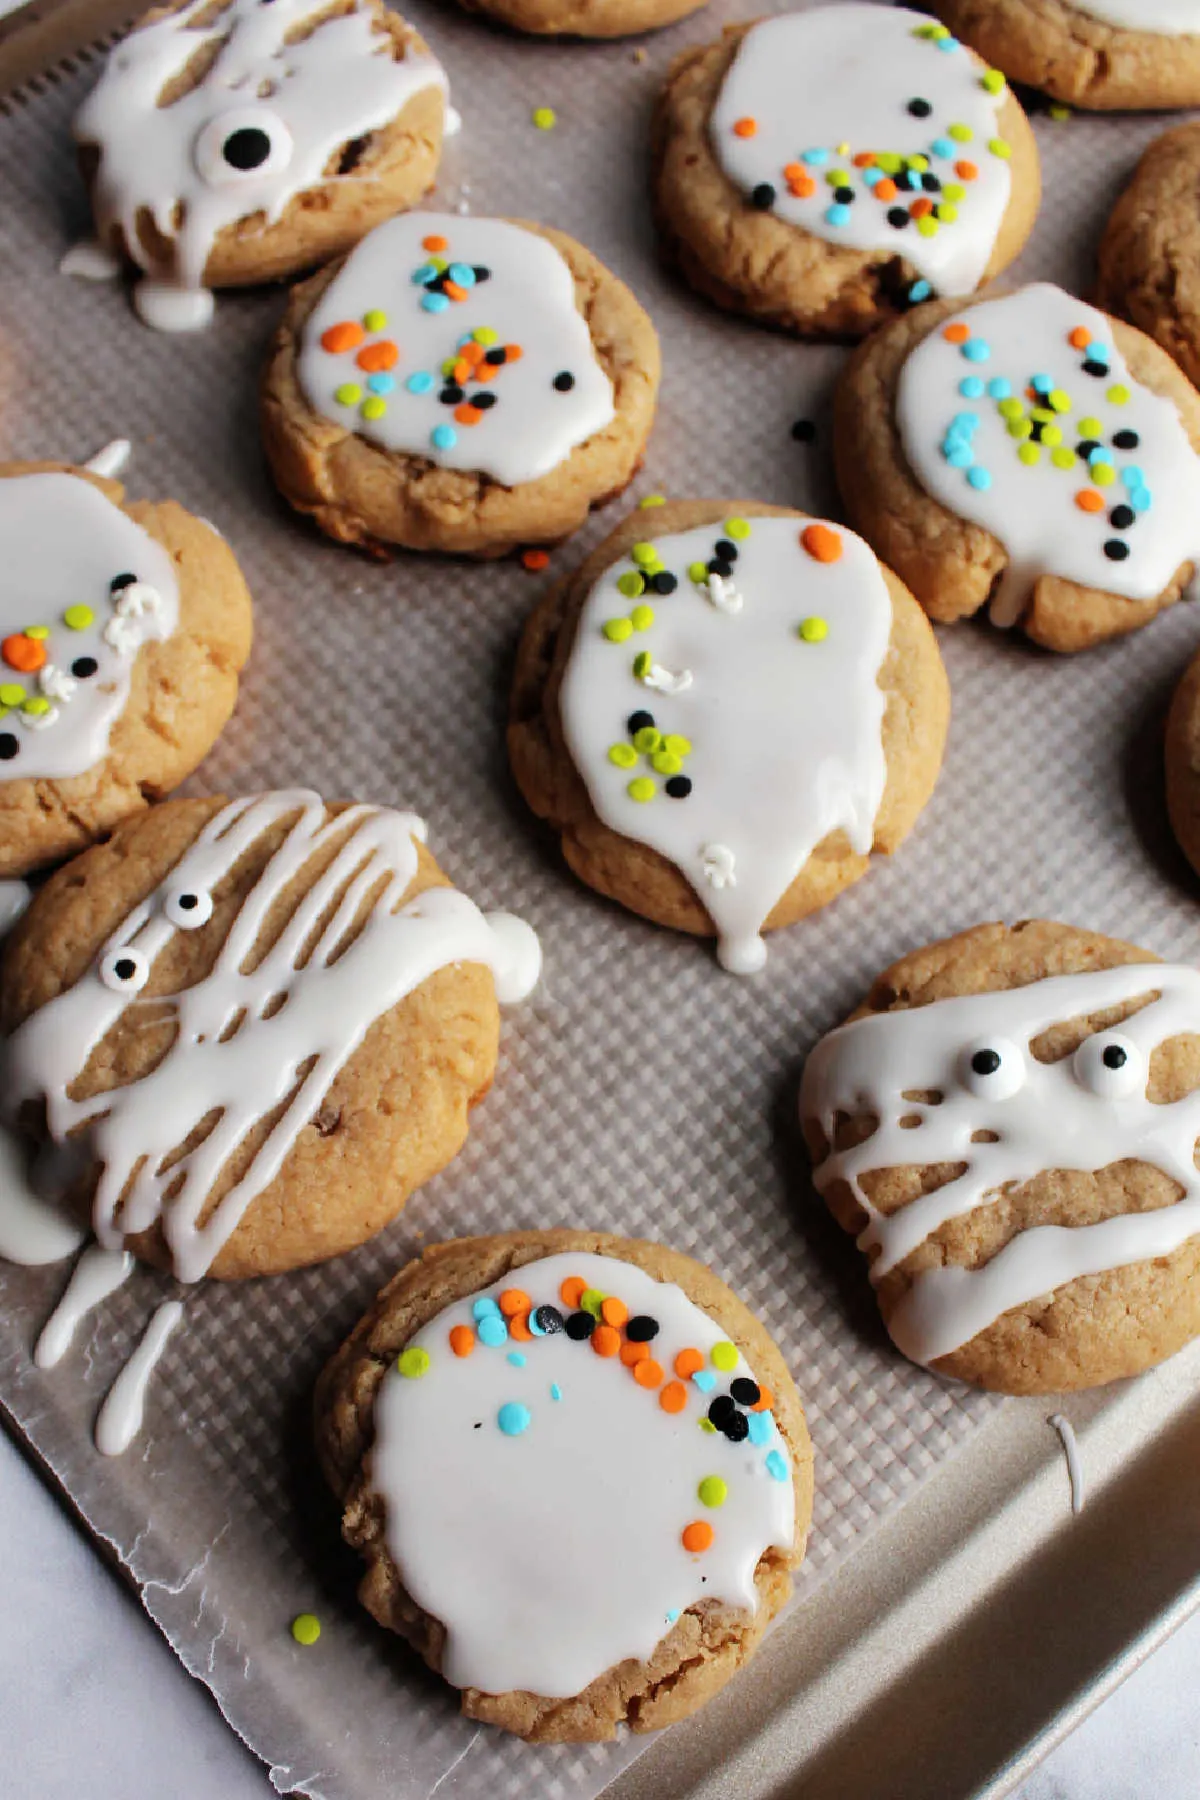 Tray of maple cinnamon cookies with white icing glaze and sprinkles on top.